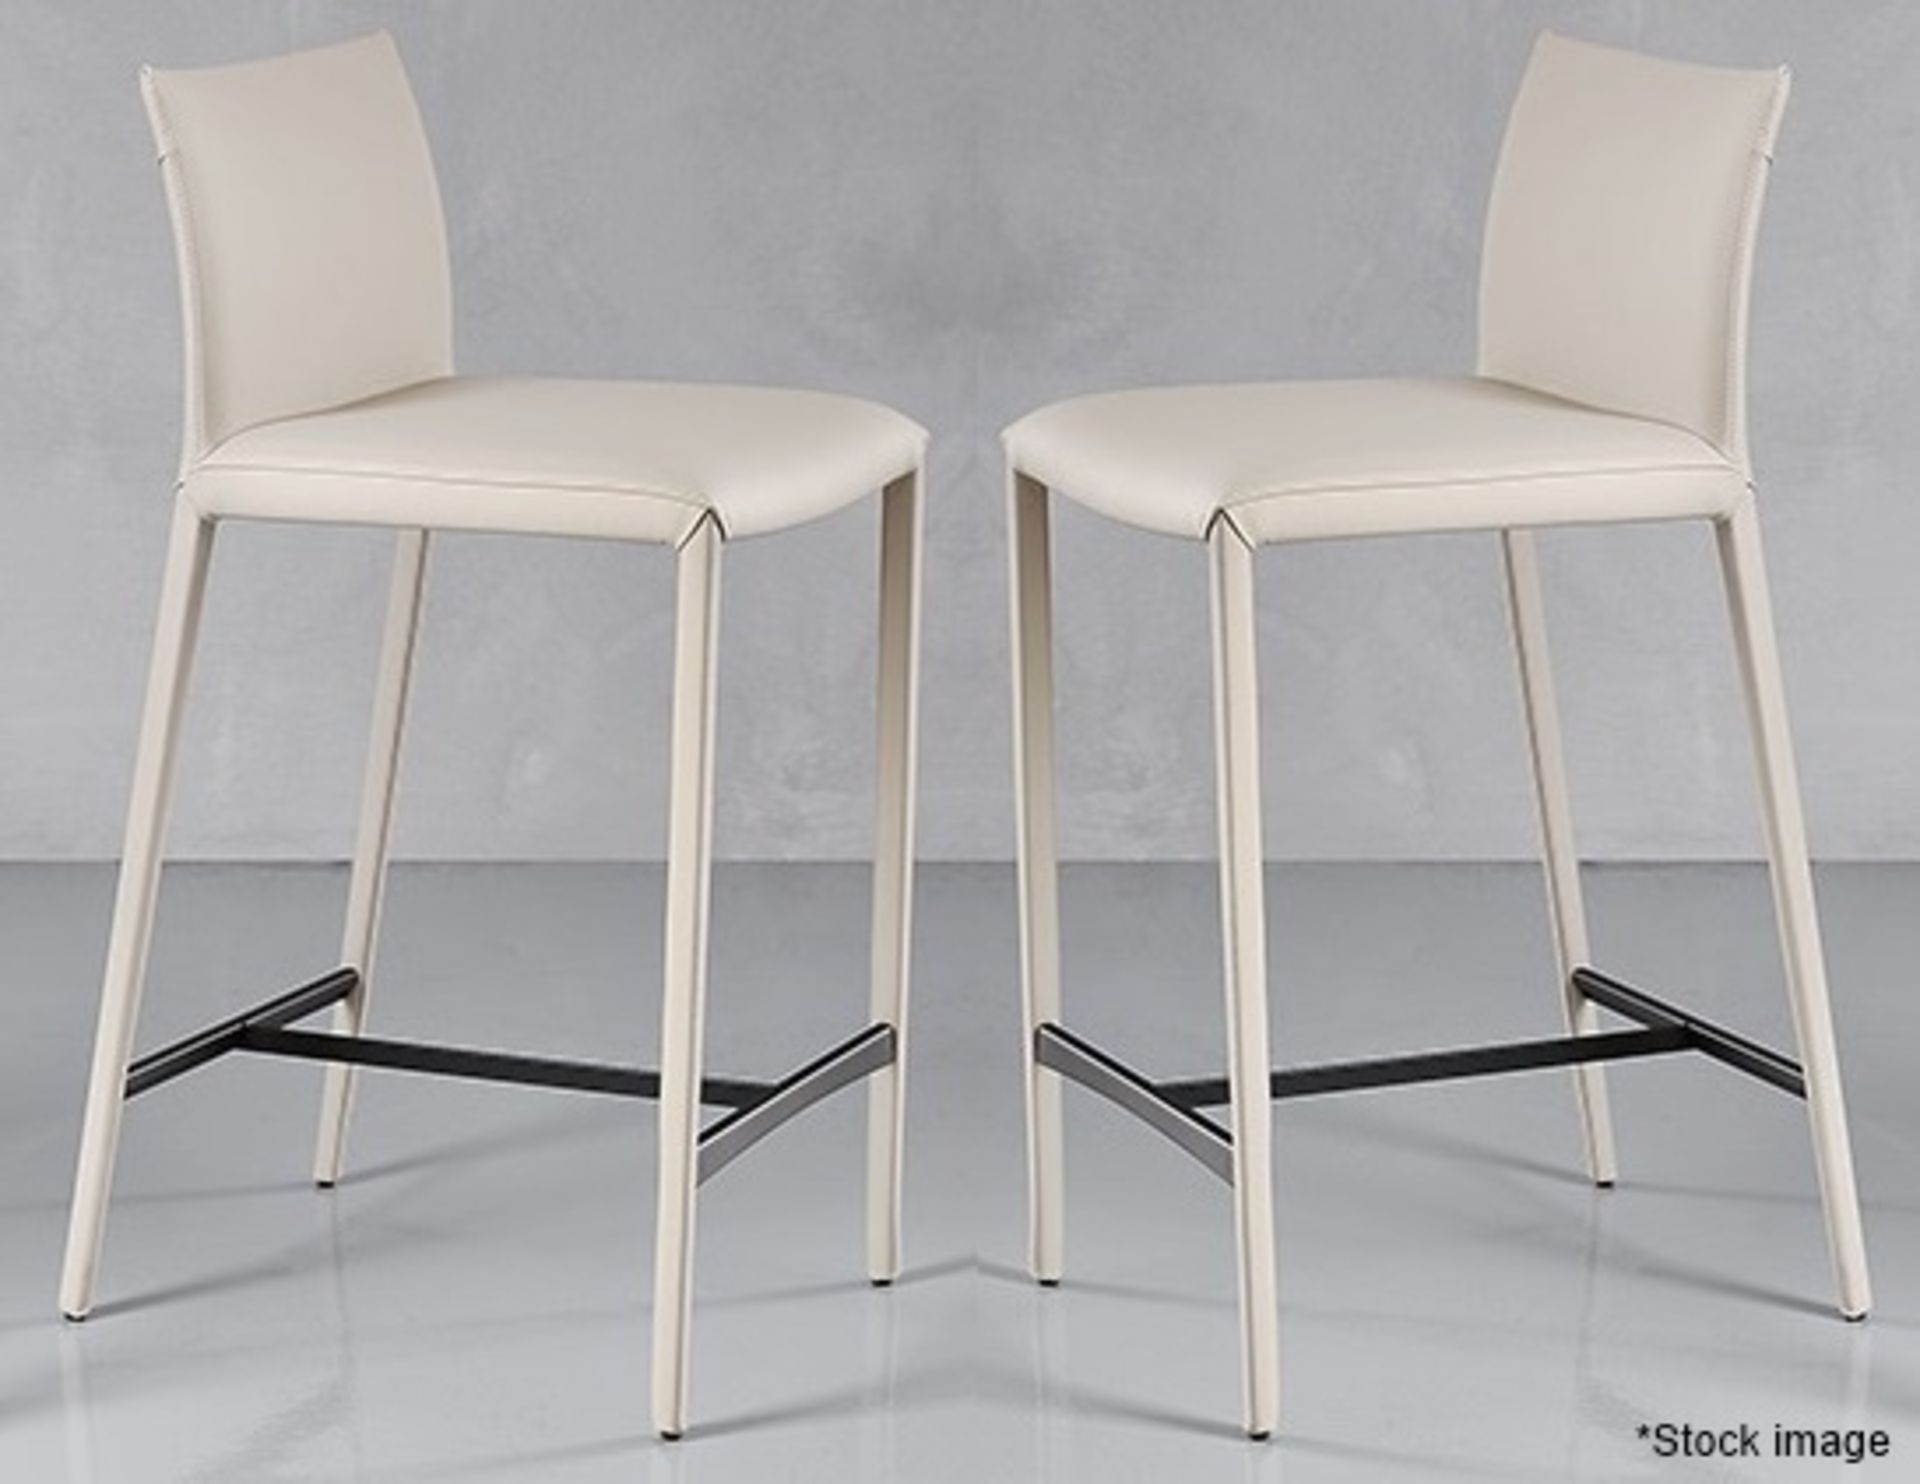 Pair of CATTELAN ITALIA 'Norma' Designer Fully Upholstered Stools in a Light Synthetic Leather